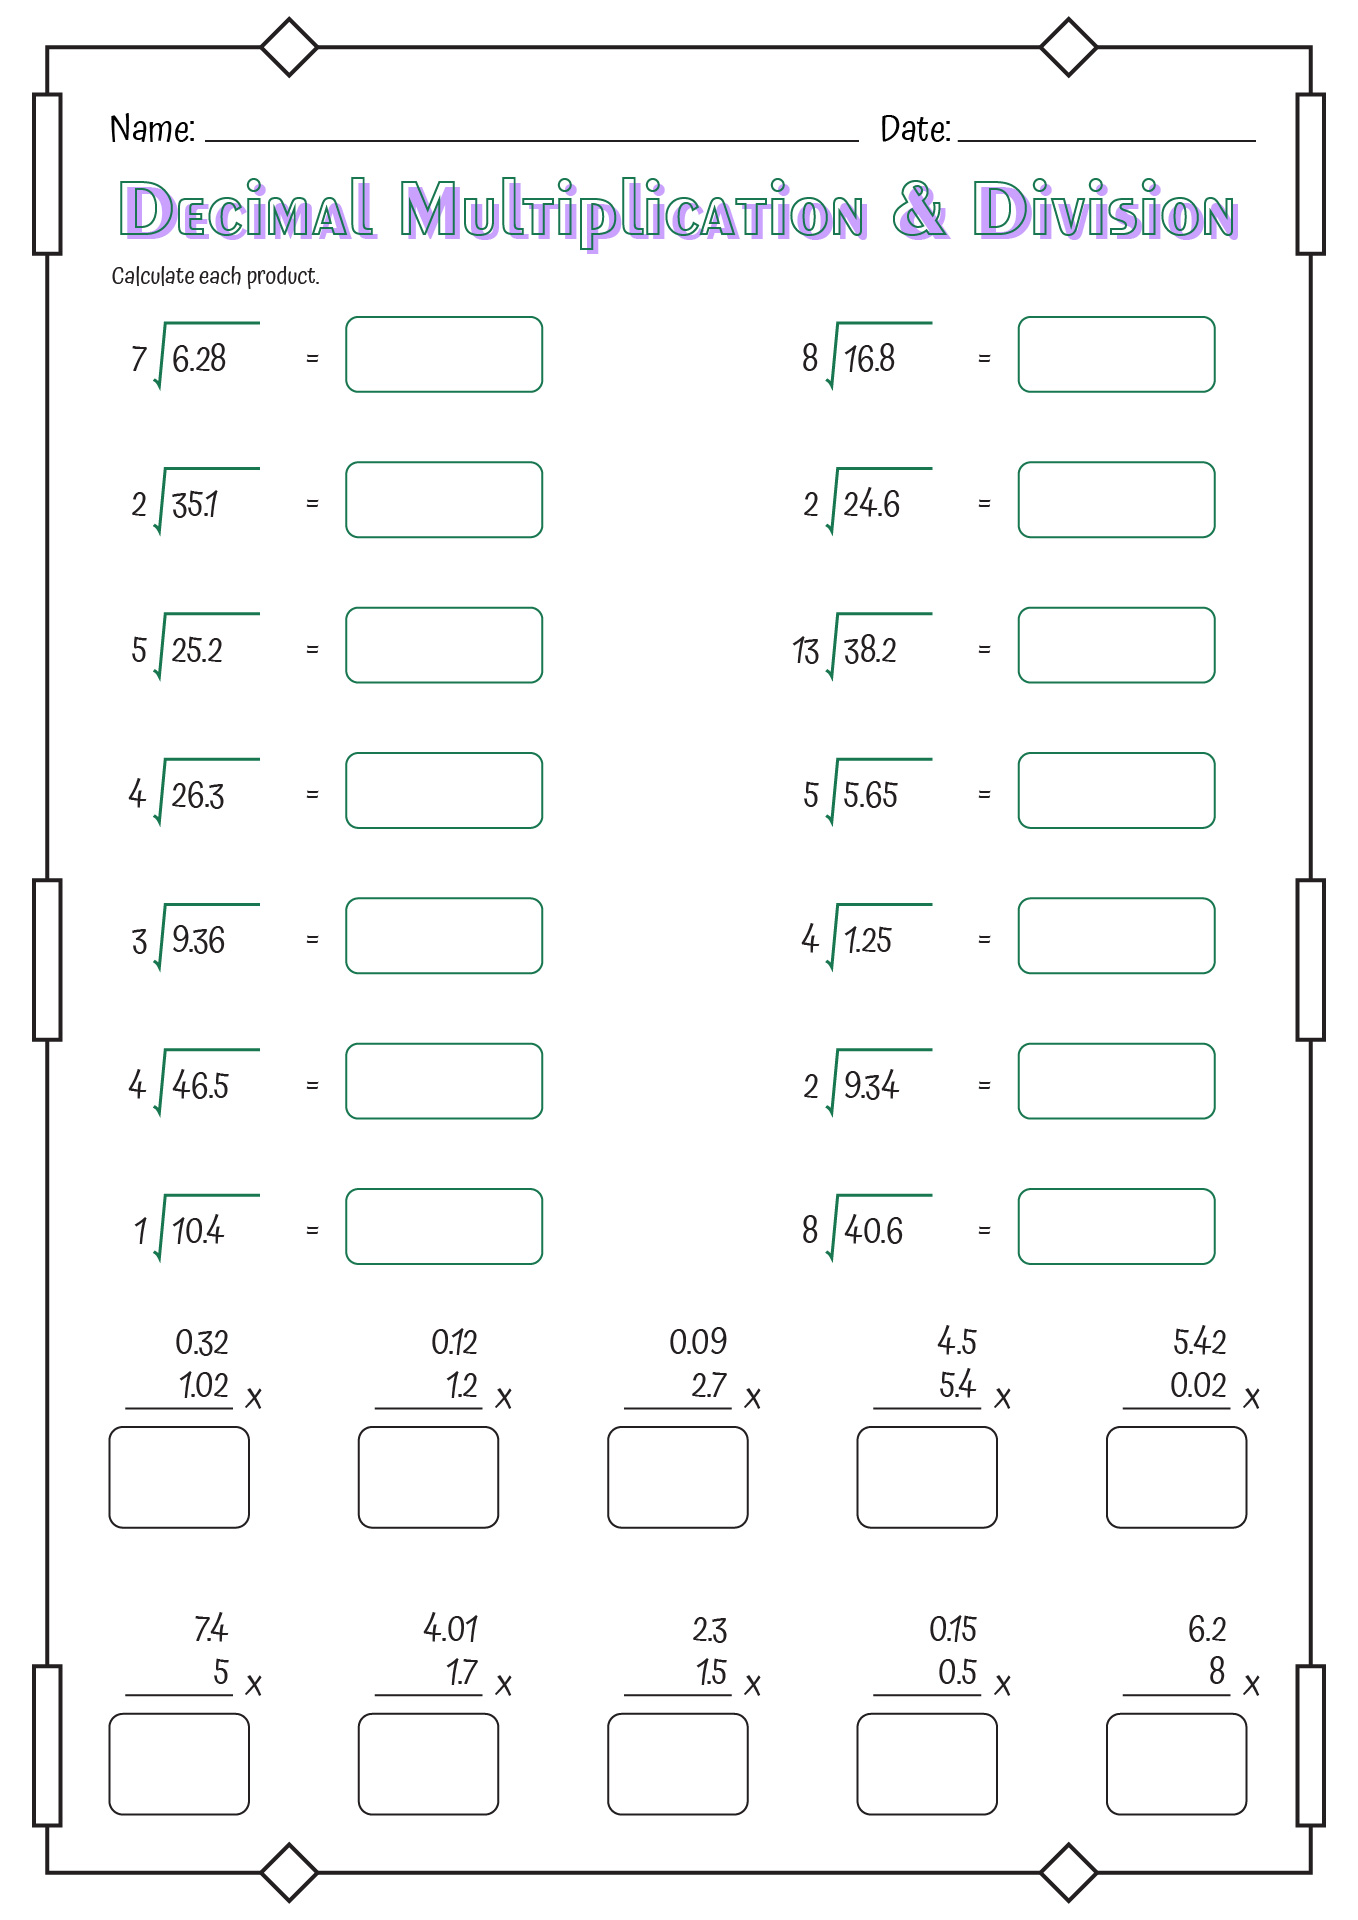 Multiplying Decimals By Whole Numbers Worksheets